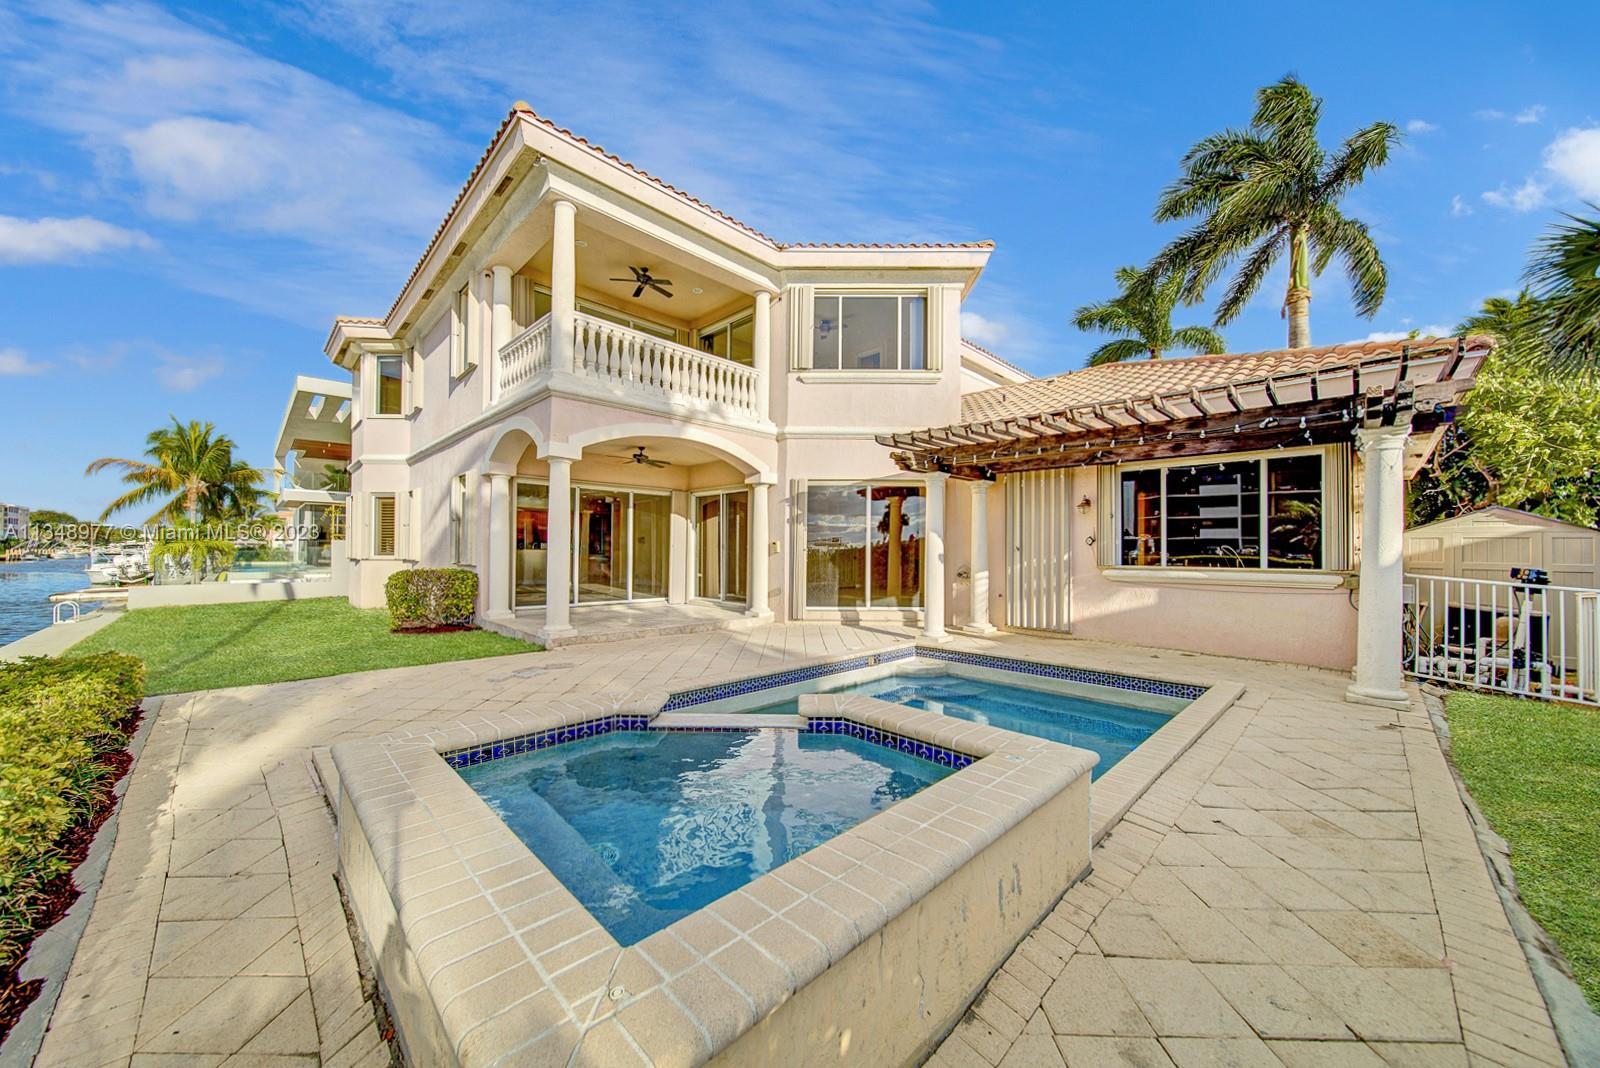 Introducing a waterfront hidden gem in prime Boca Raton, FL truly exemplifies luxurious waterfront l